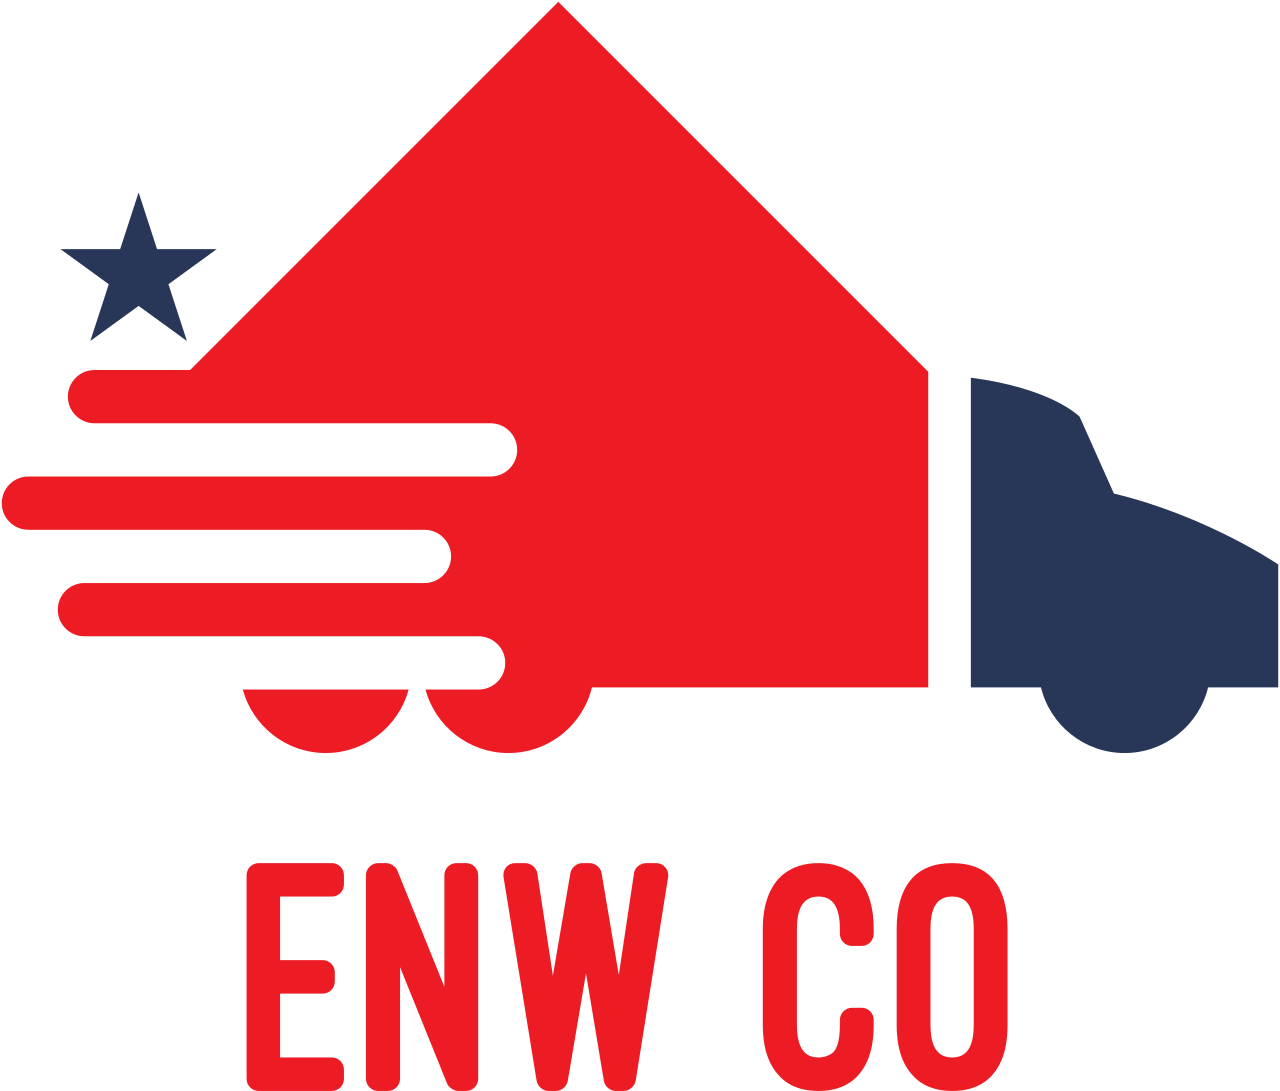 Enw Co's web page